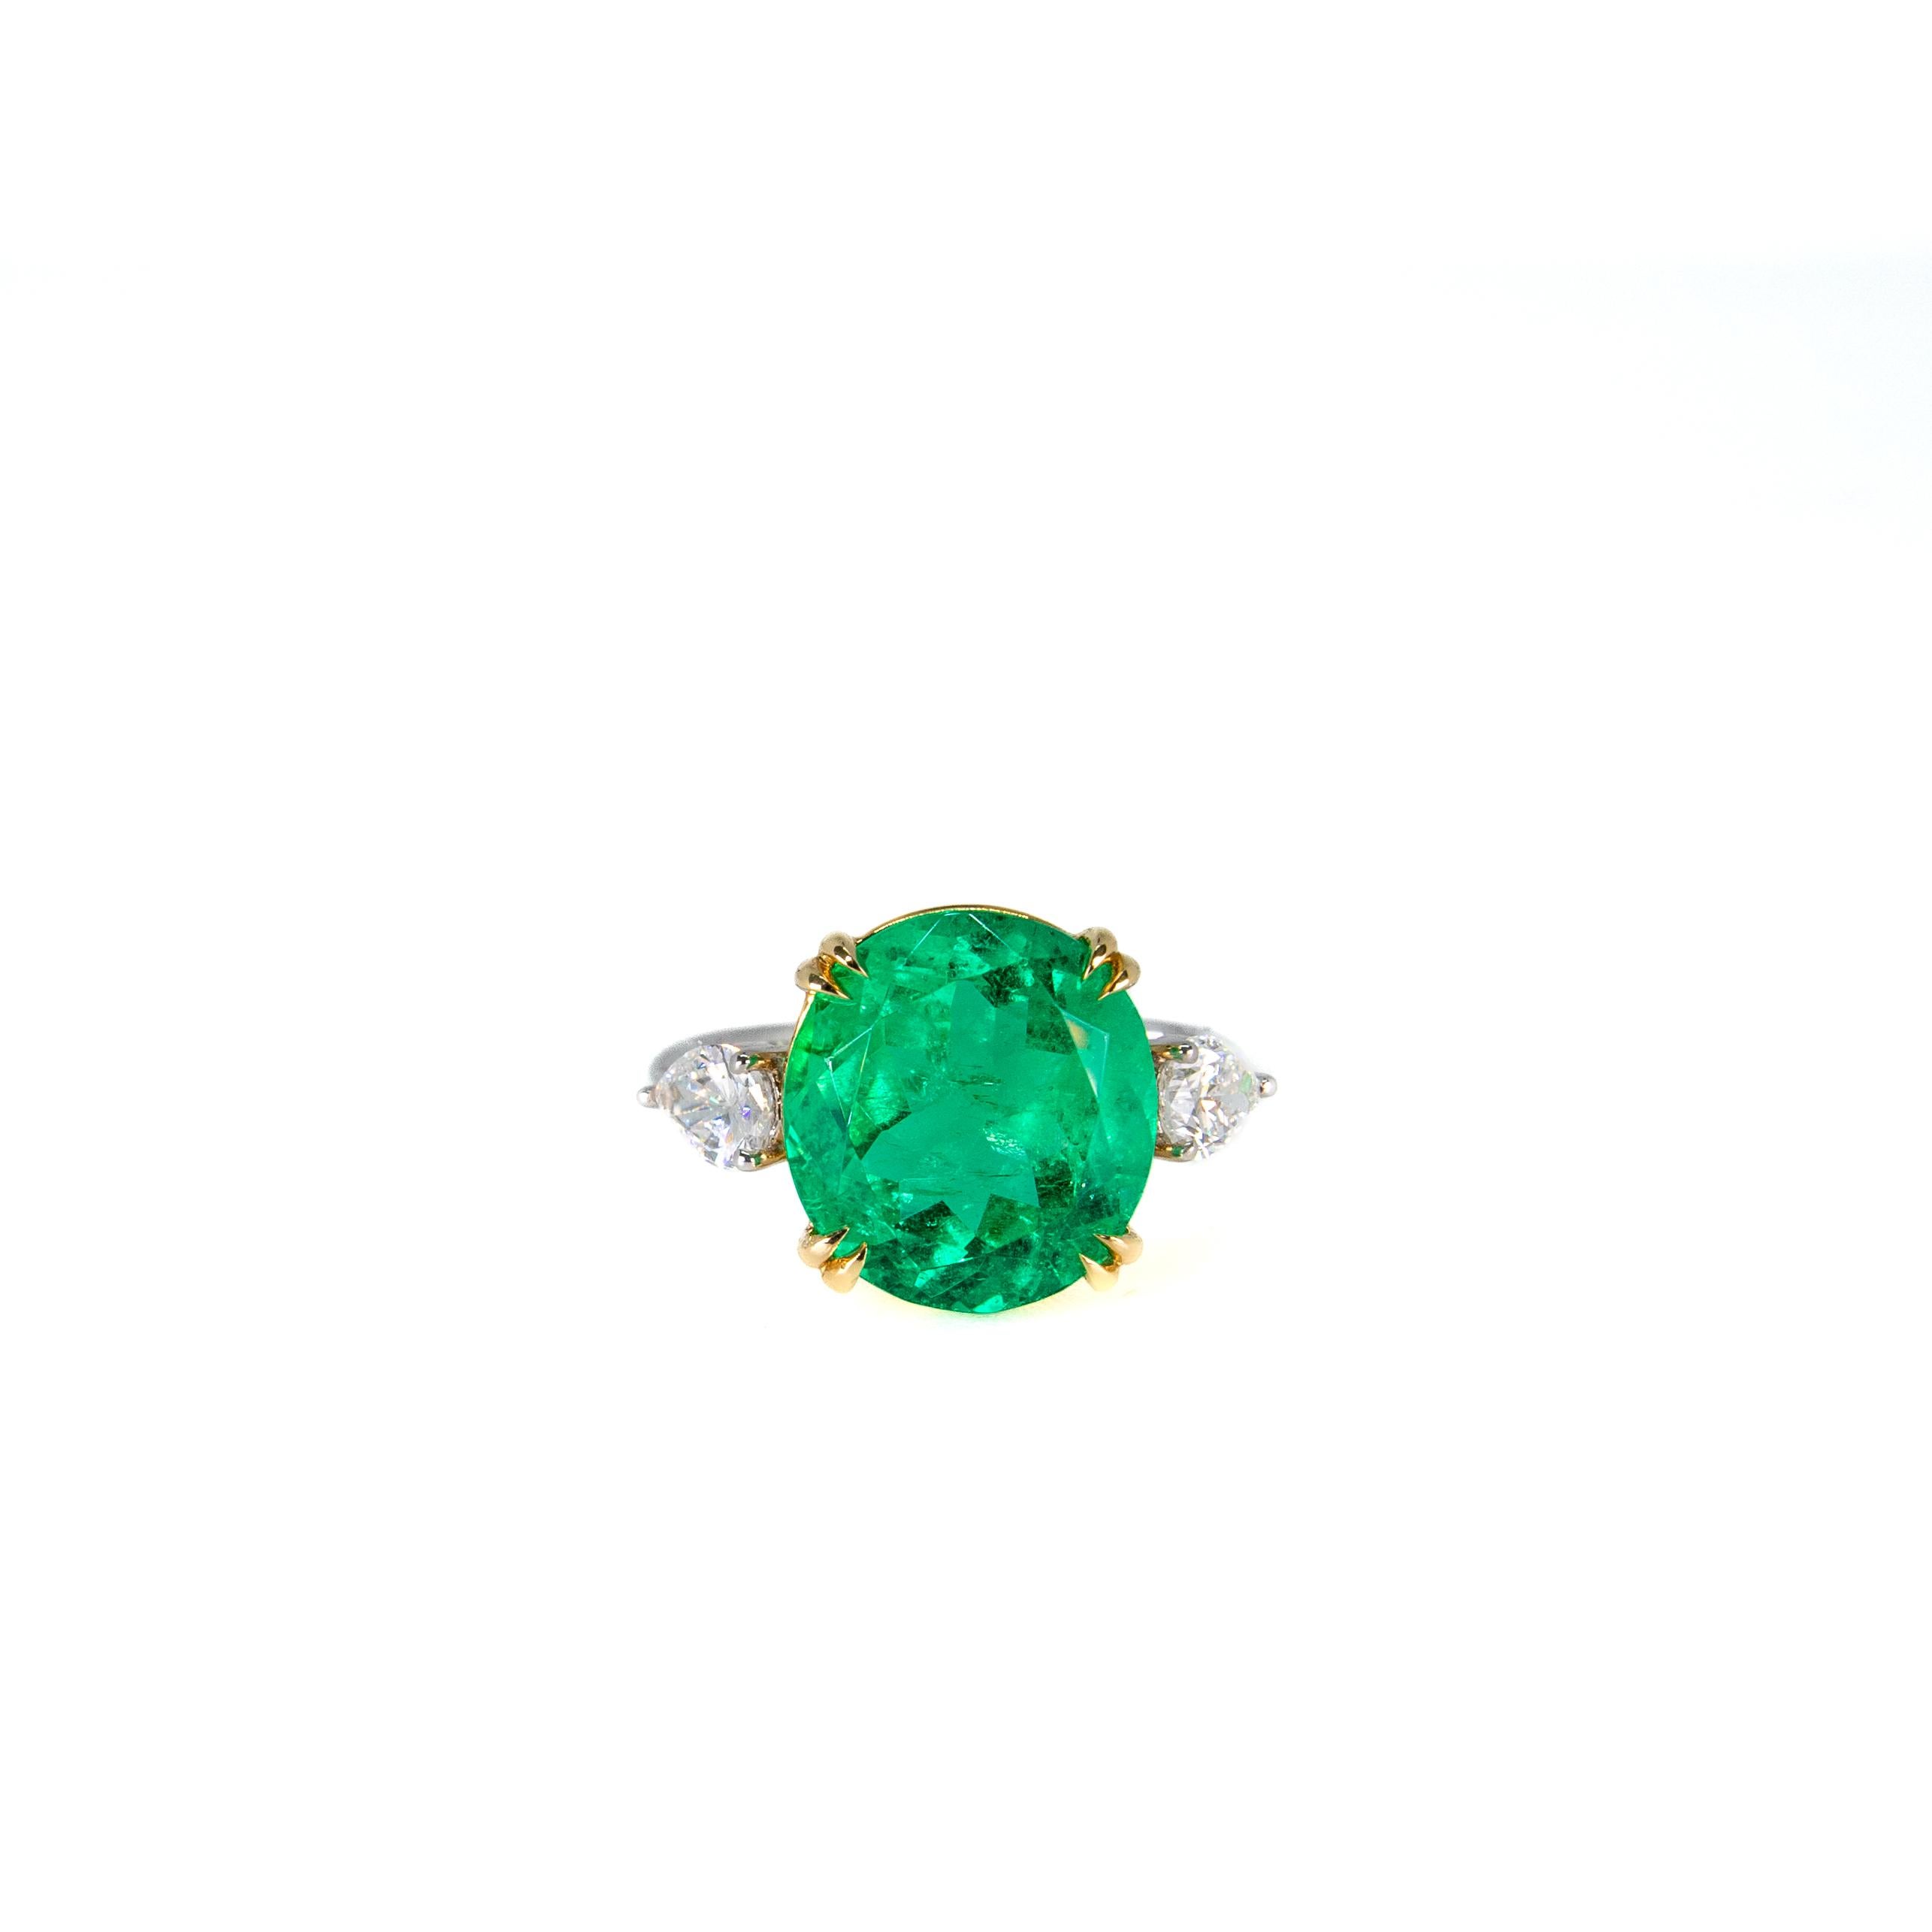 5.51ct Certified Colombian Emerald Insignificant Oil and Pear Shape Diamond Ring For Sale 1